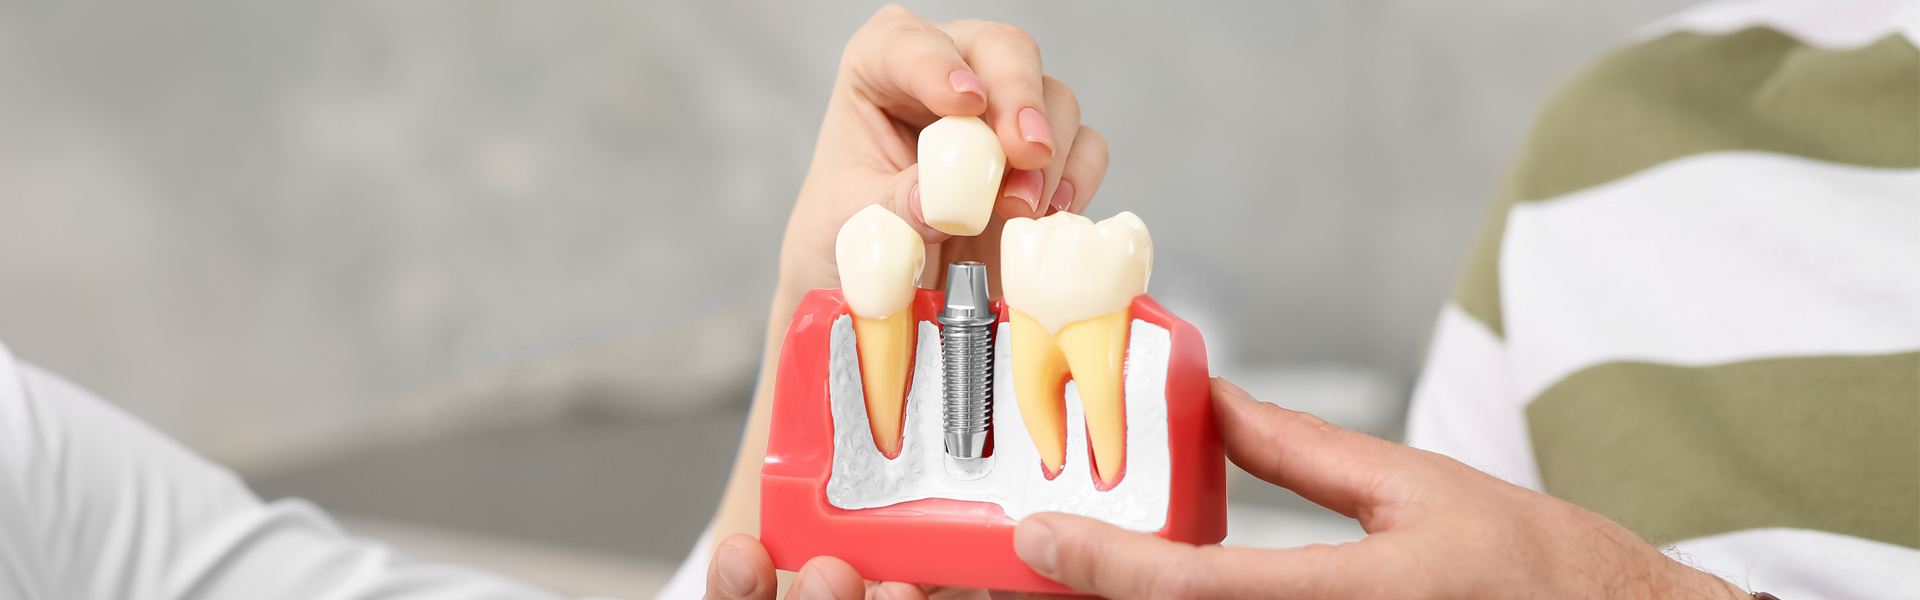 Will I Be in Pain after Getting a Dental Implant?